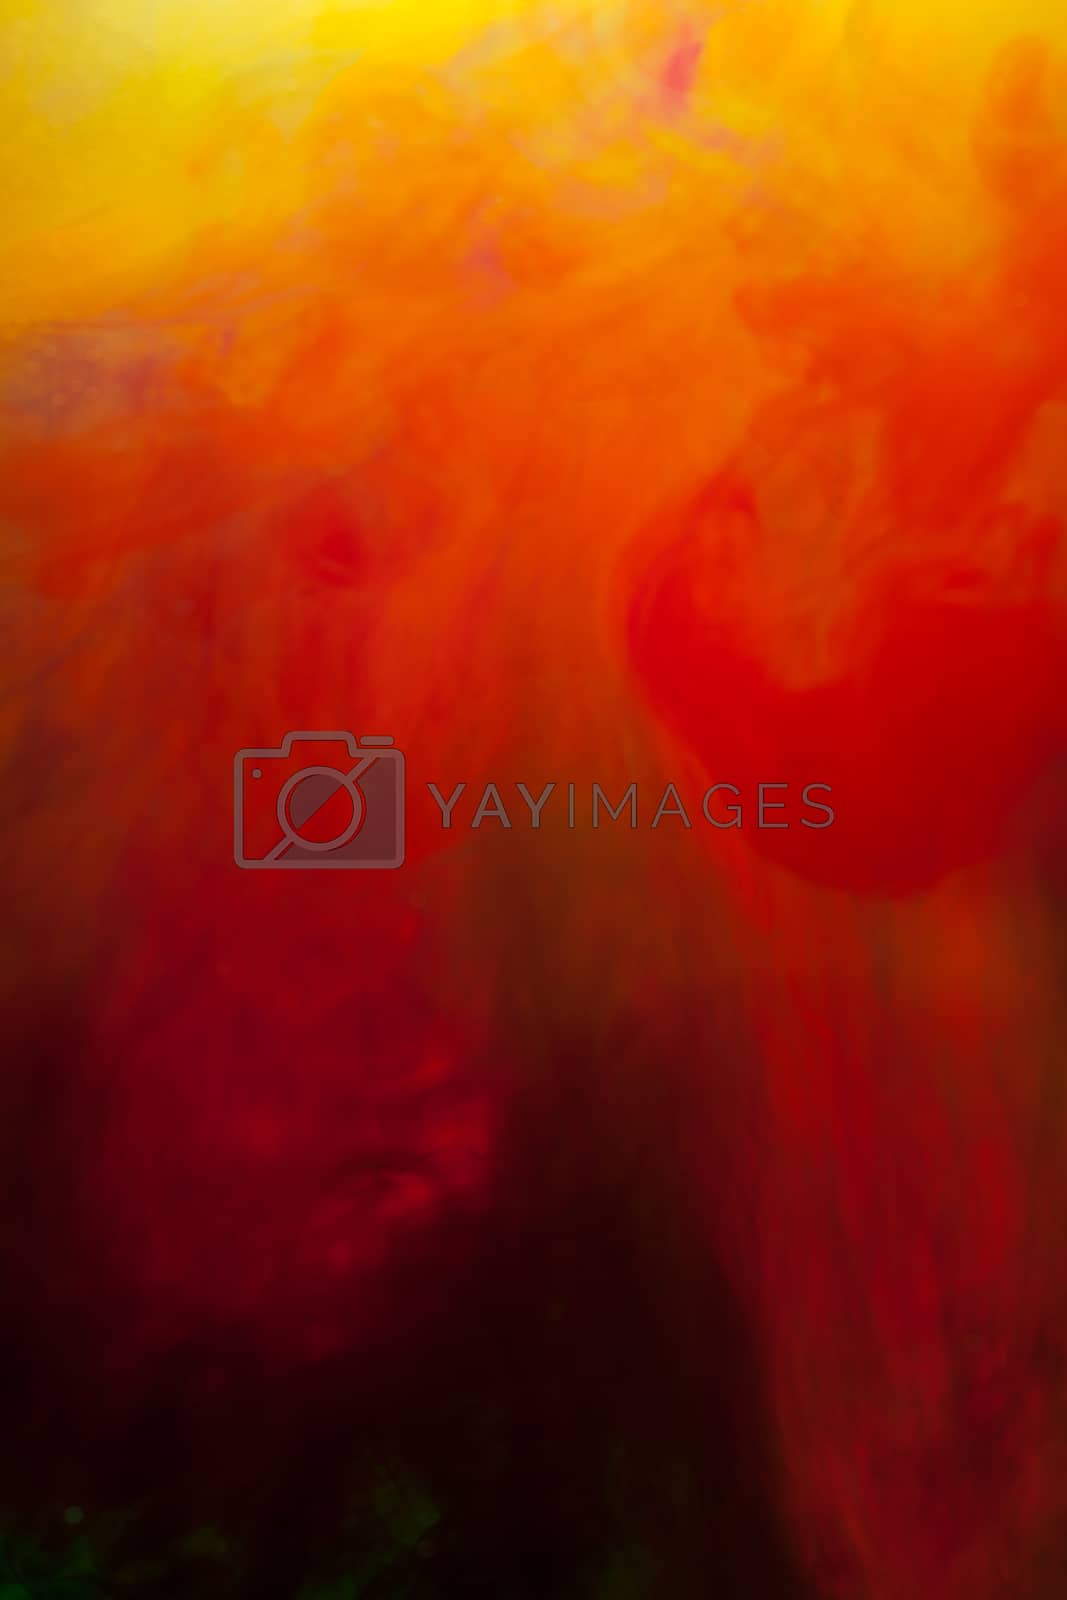 Royalty free image of Abstract background by wjarek